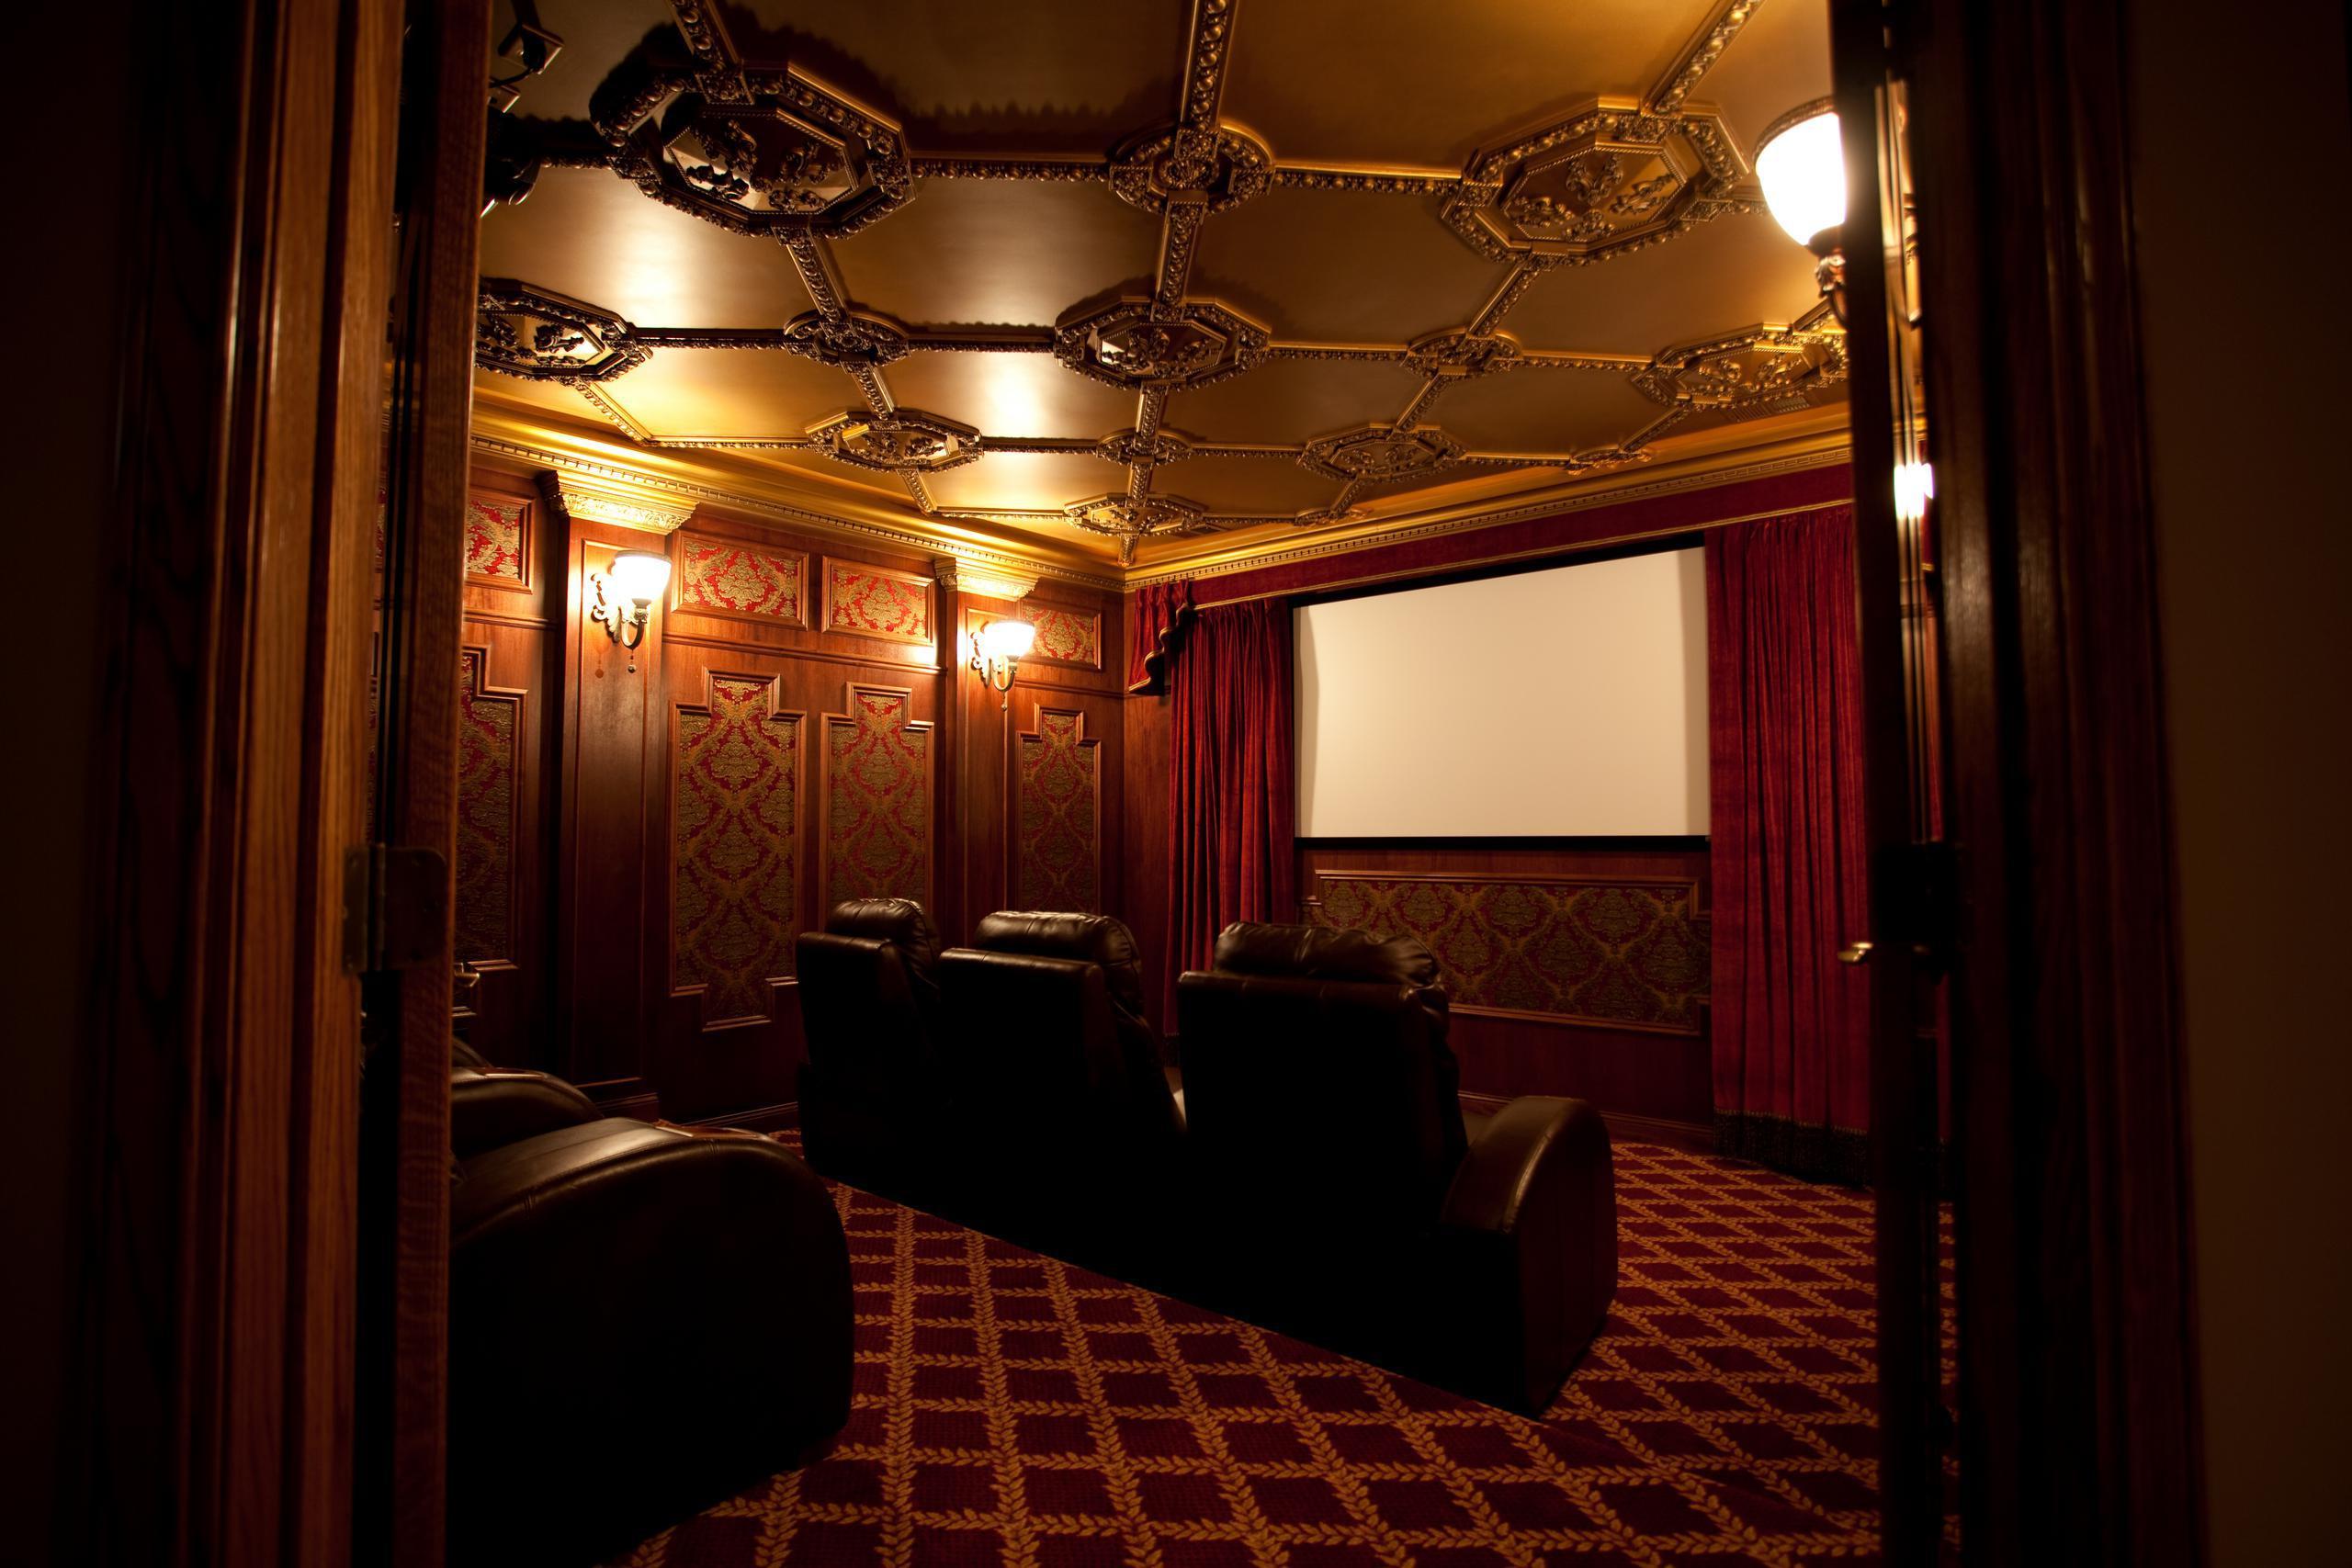 Home theater installation from ECSI